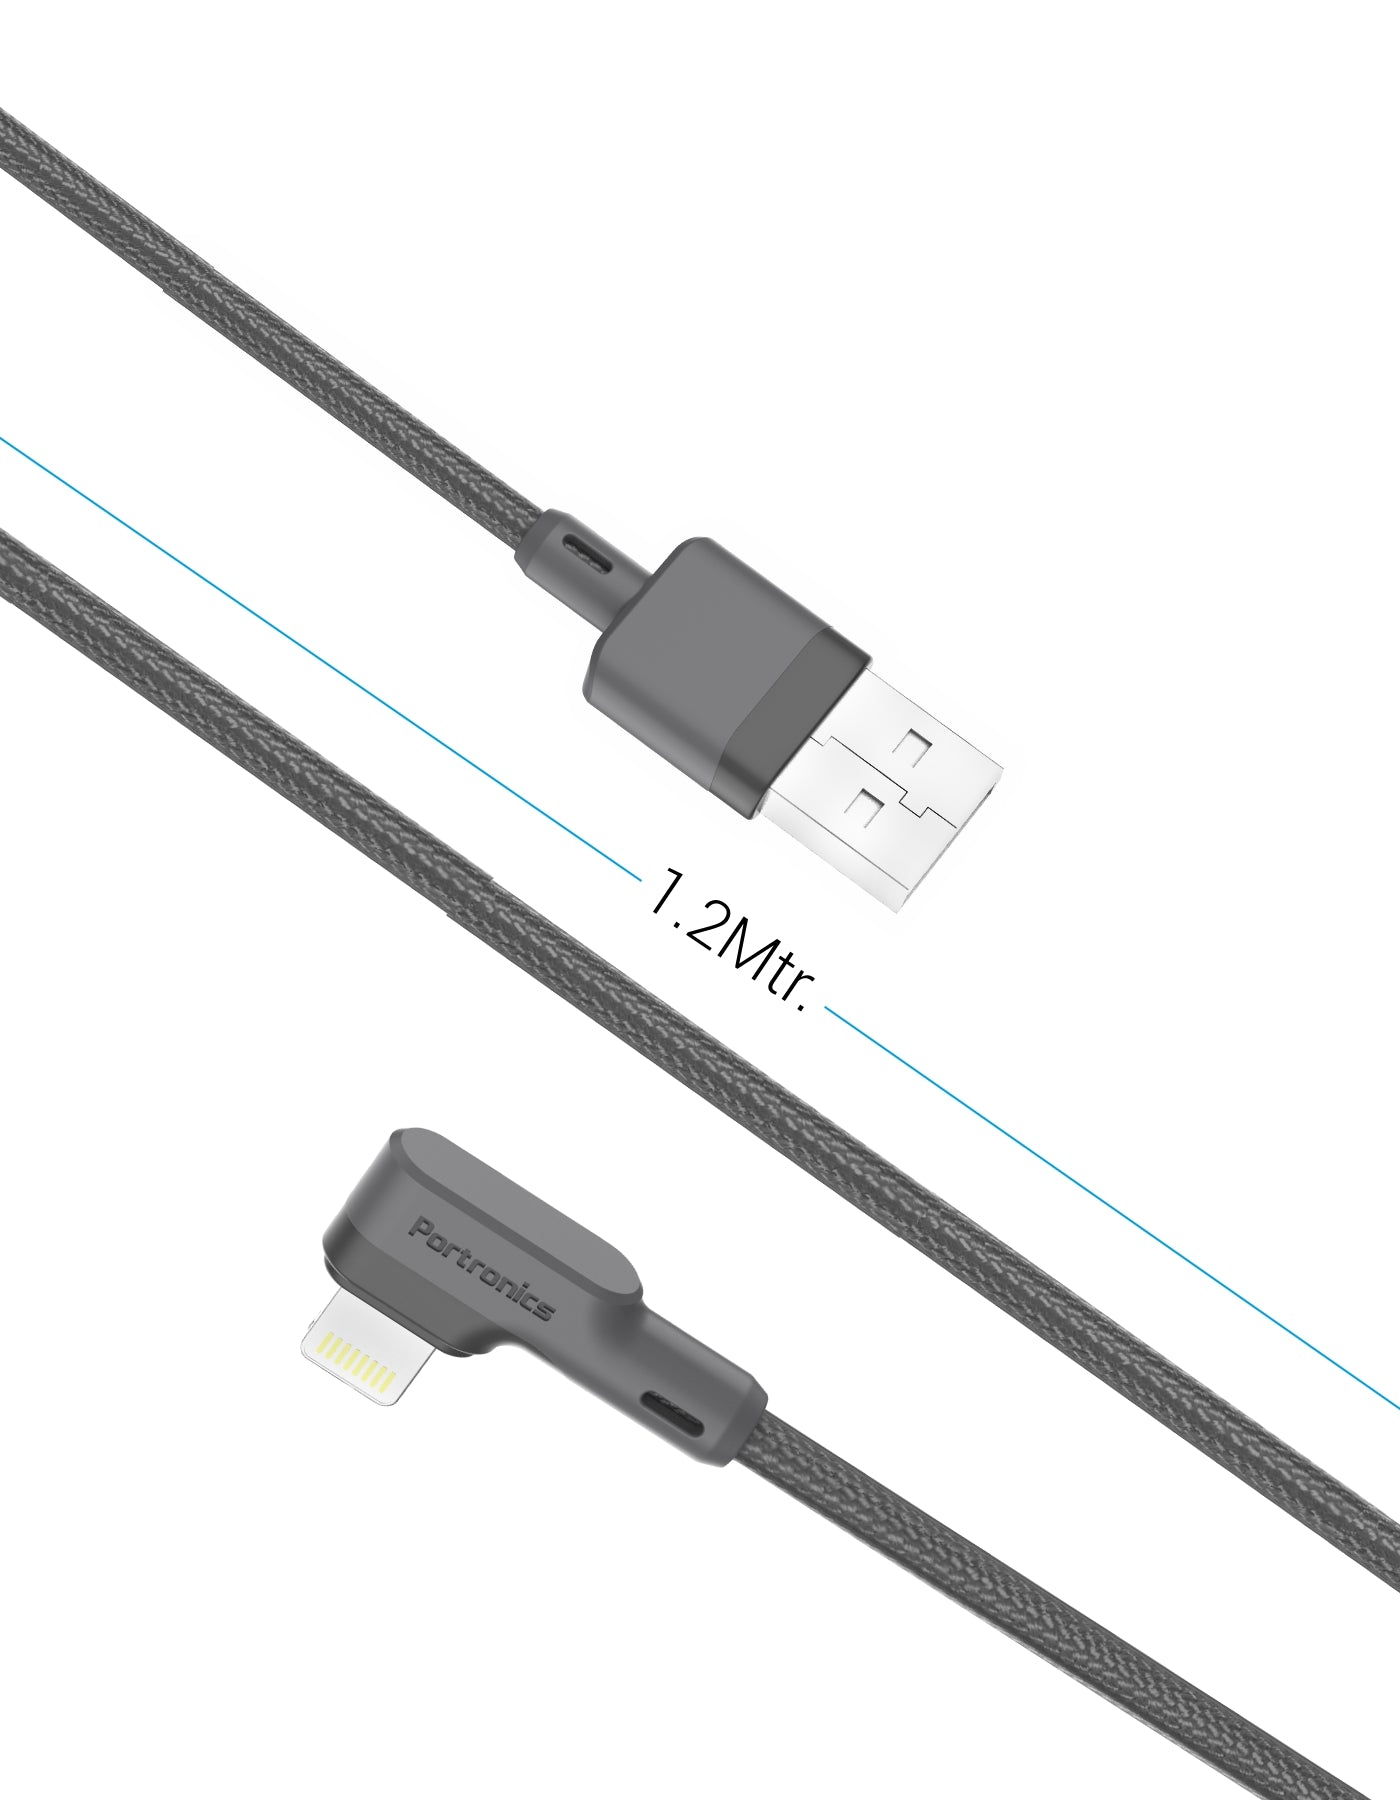 Portronics Konnect L 8 Pin USB cable comes with fast charging